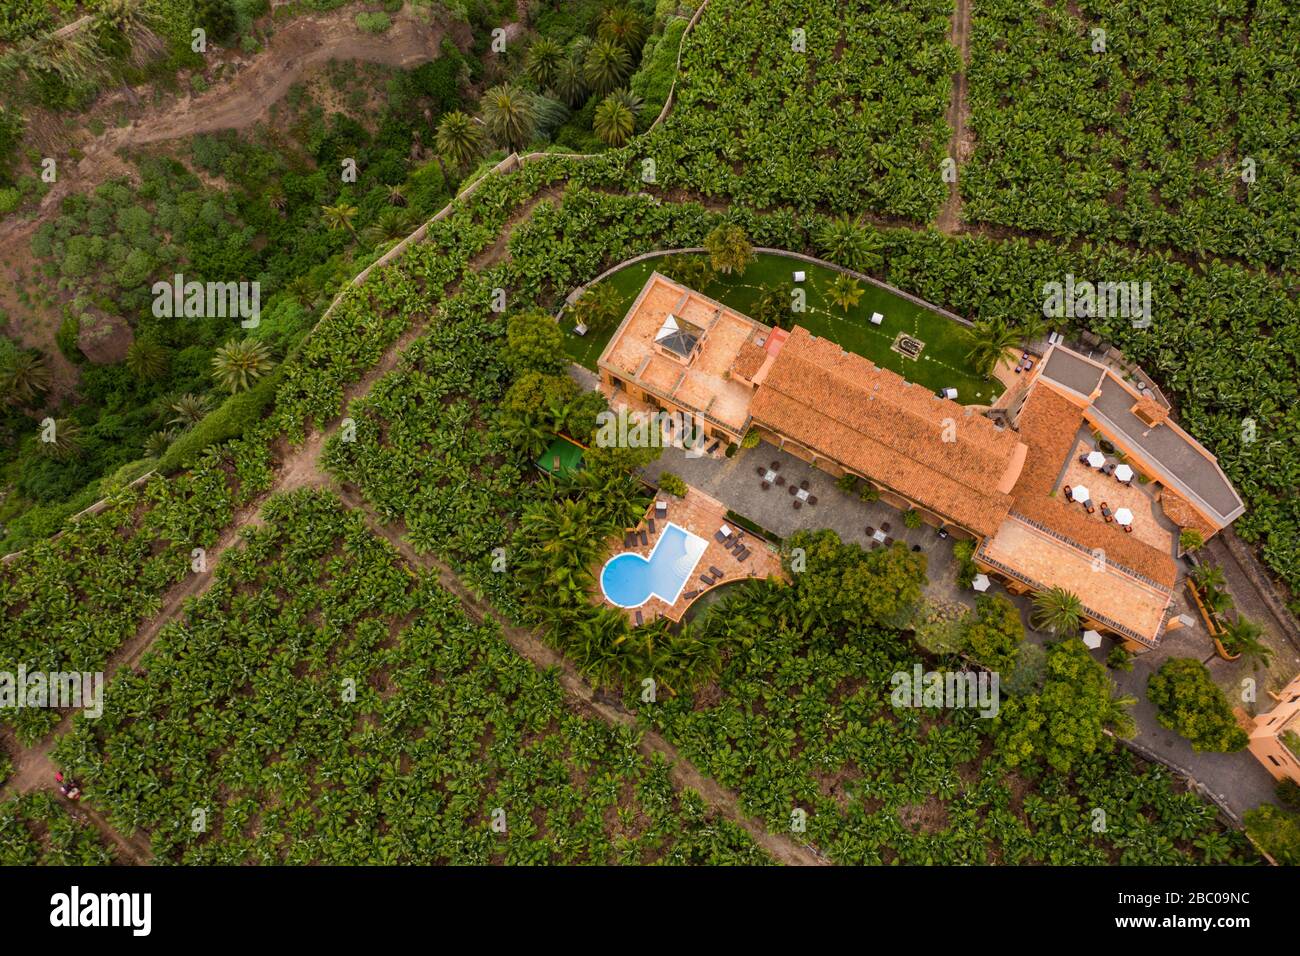 Spain, Canary Islands, Gran Canaria, Arucas - Hotel Rural La Hacienda Del Buen Suceso. Located right in the middle of  50 hectares of banana trees, th Stock Photo